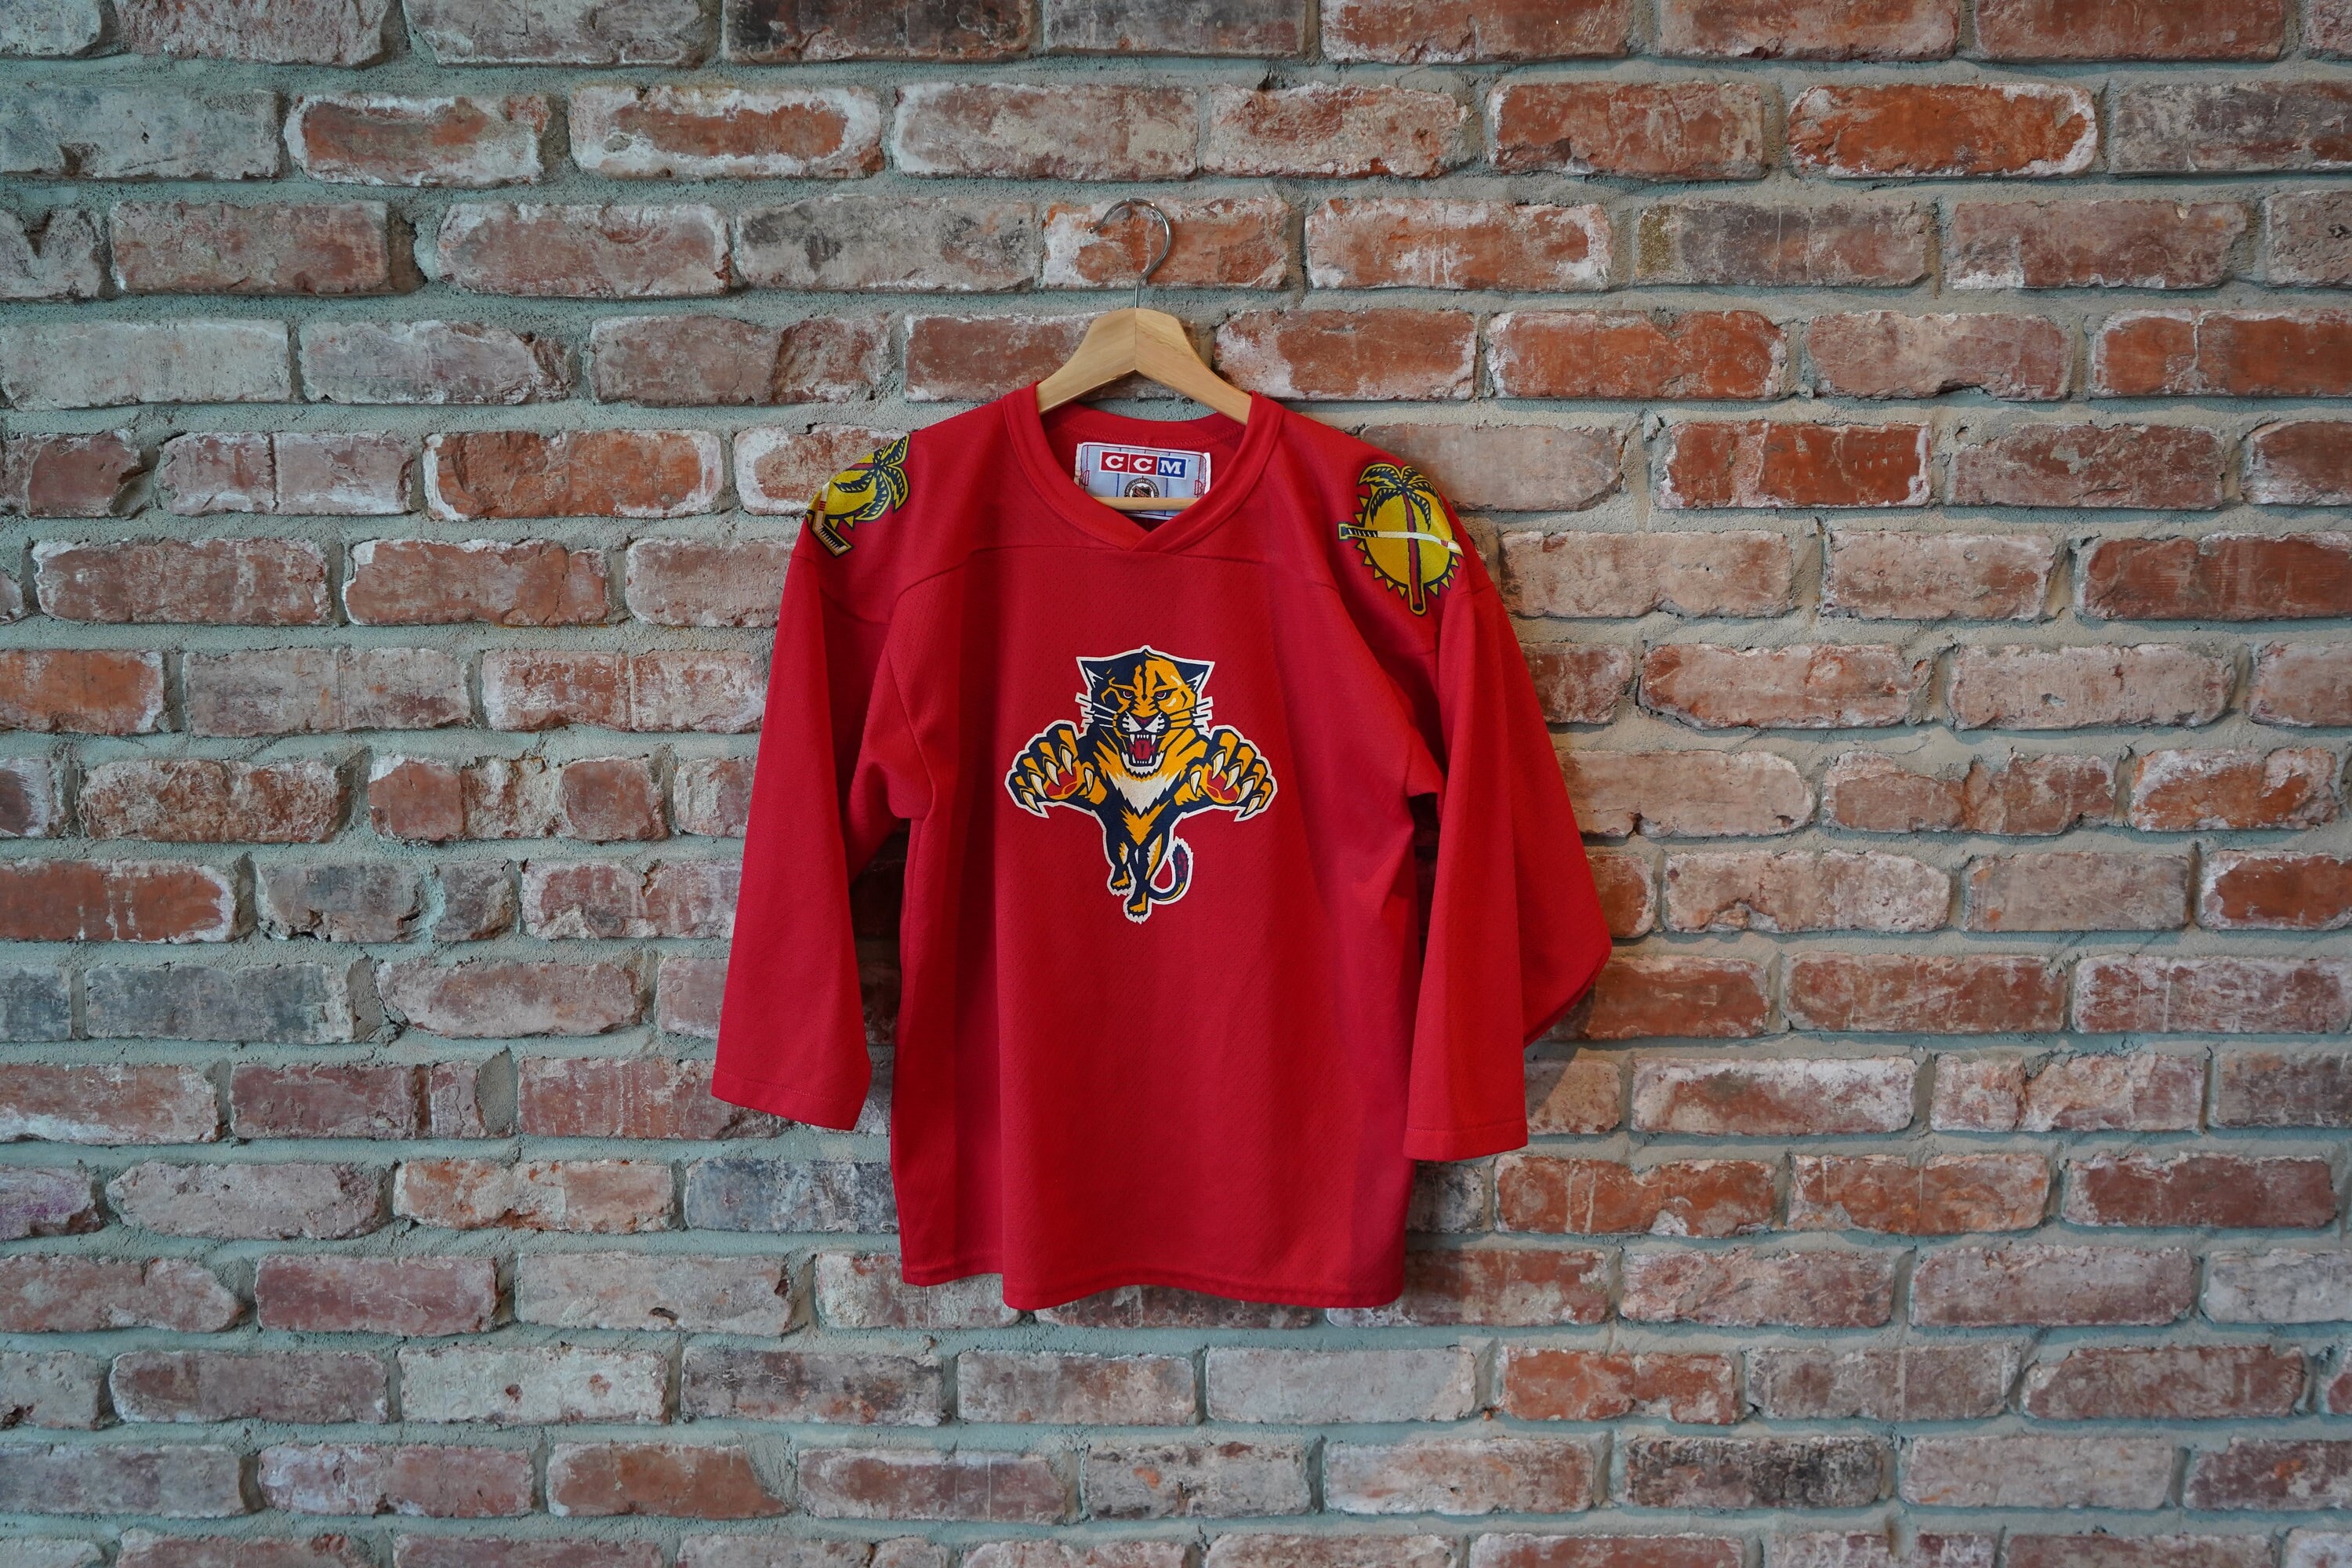 Vintage Florida Panthers Youth Jersey for Sale in Inglewood, CA